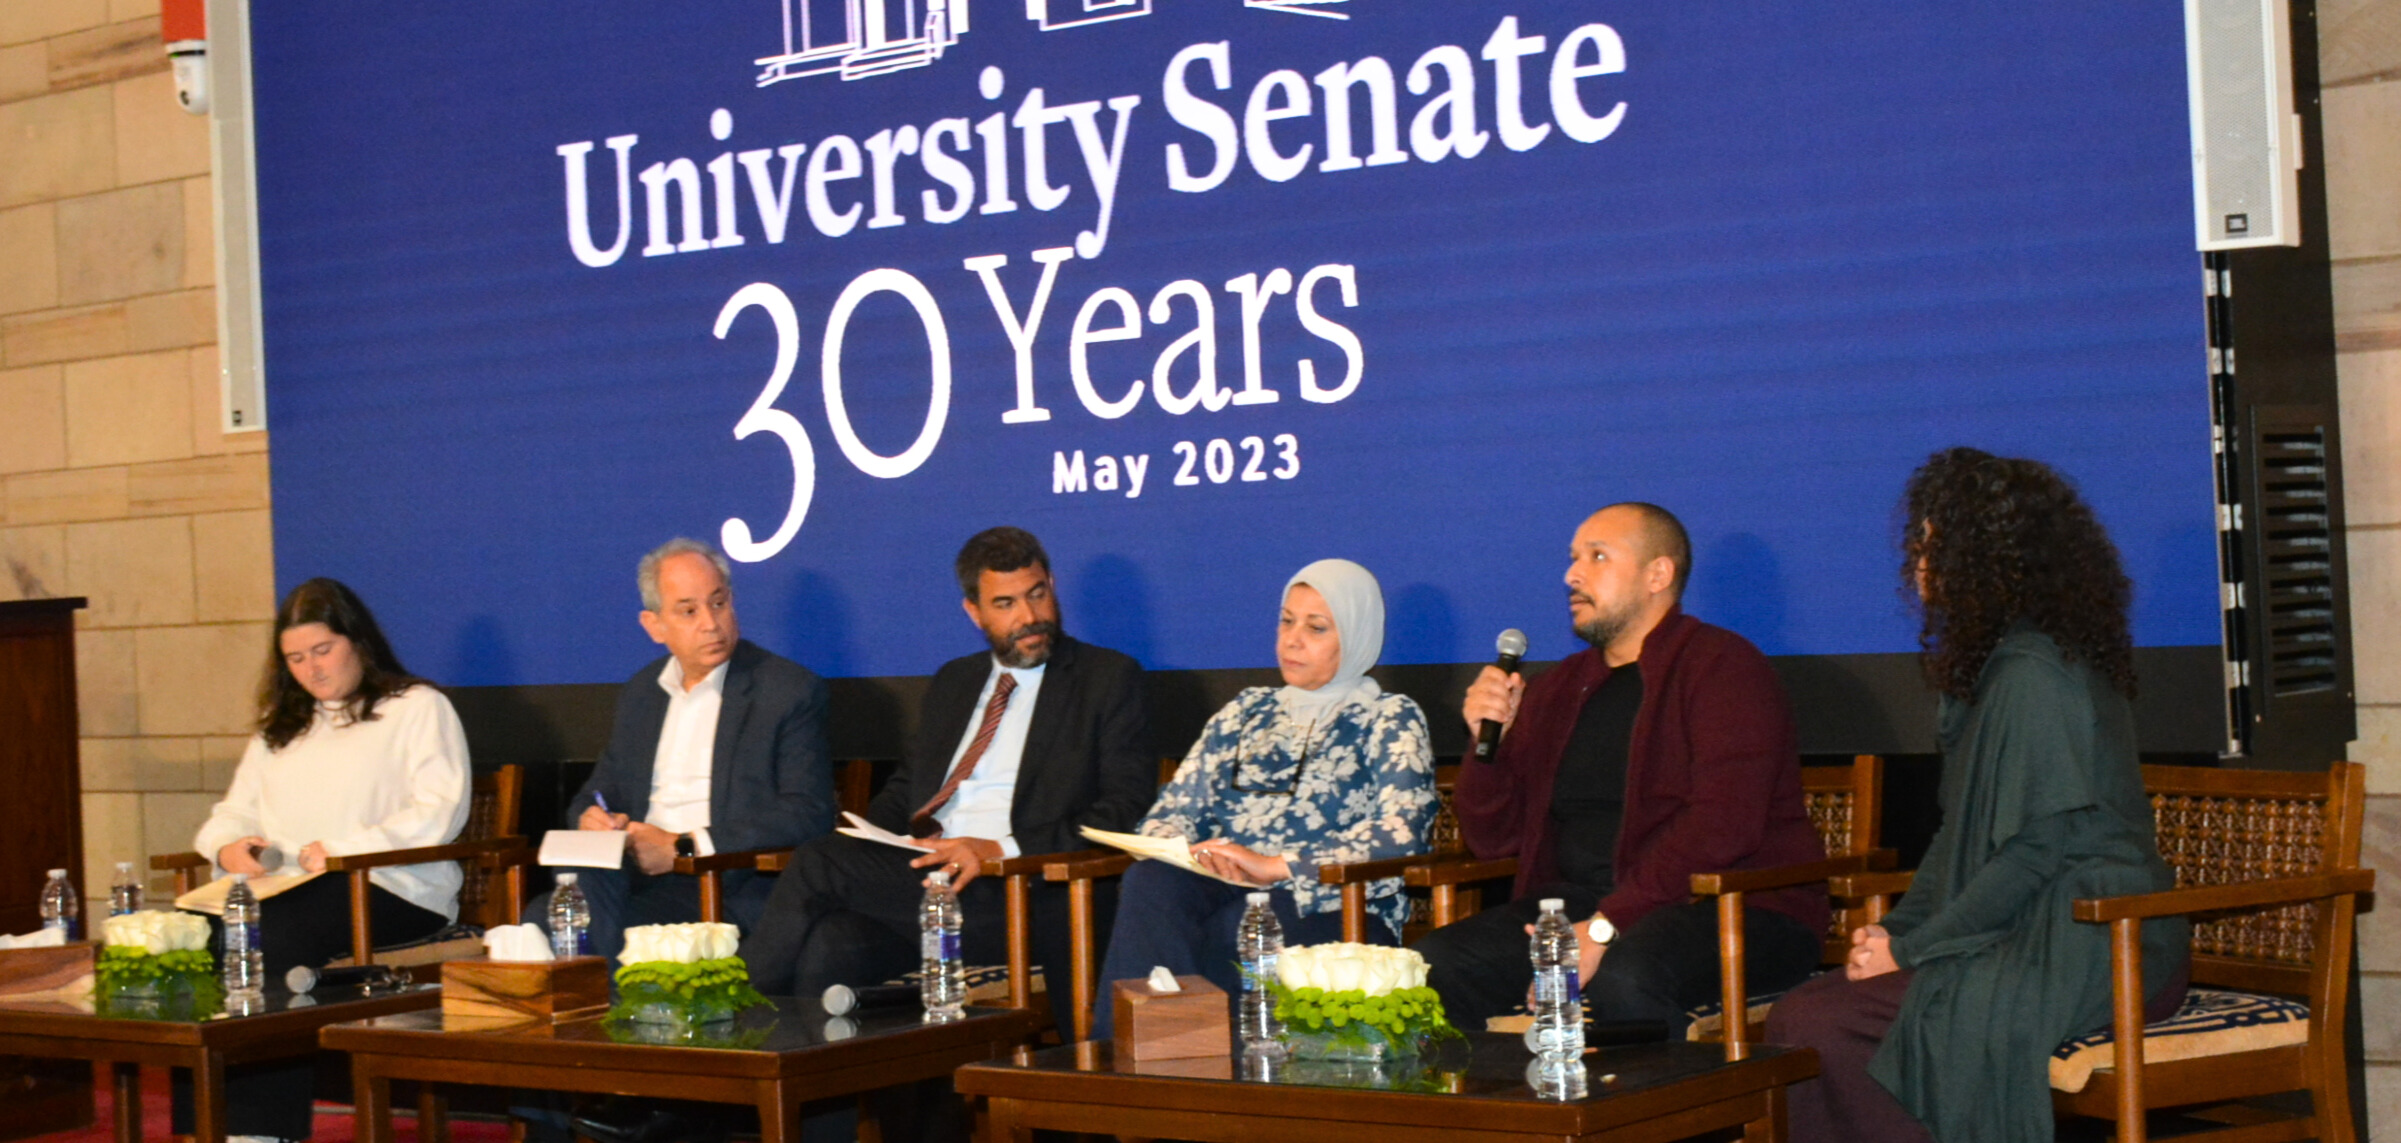 A panel discussion at the 30th anniversary celebration of the University Senate. 